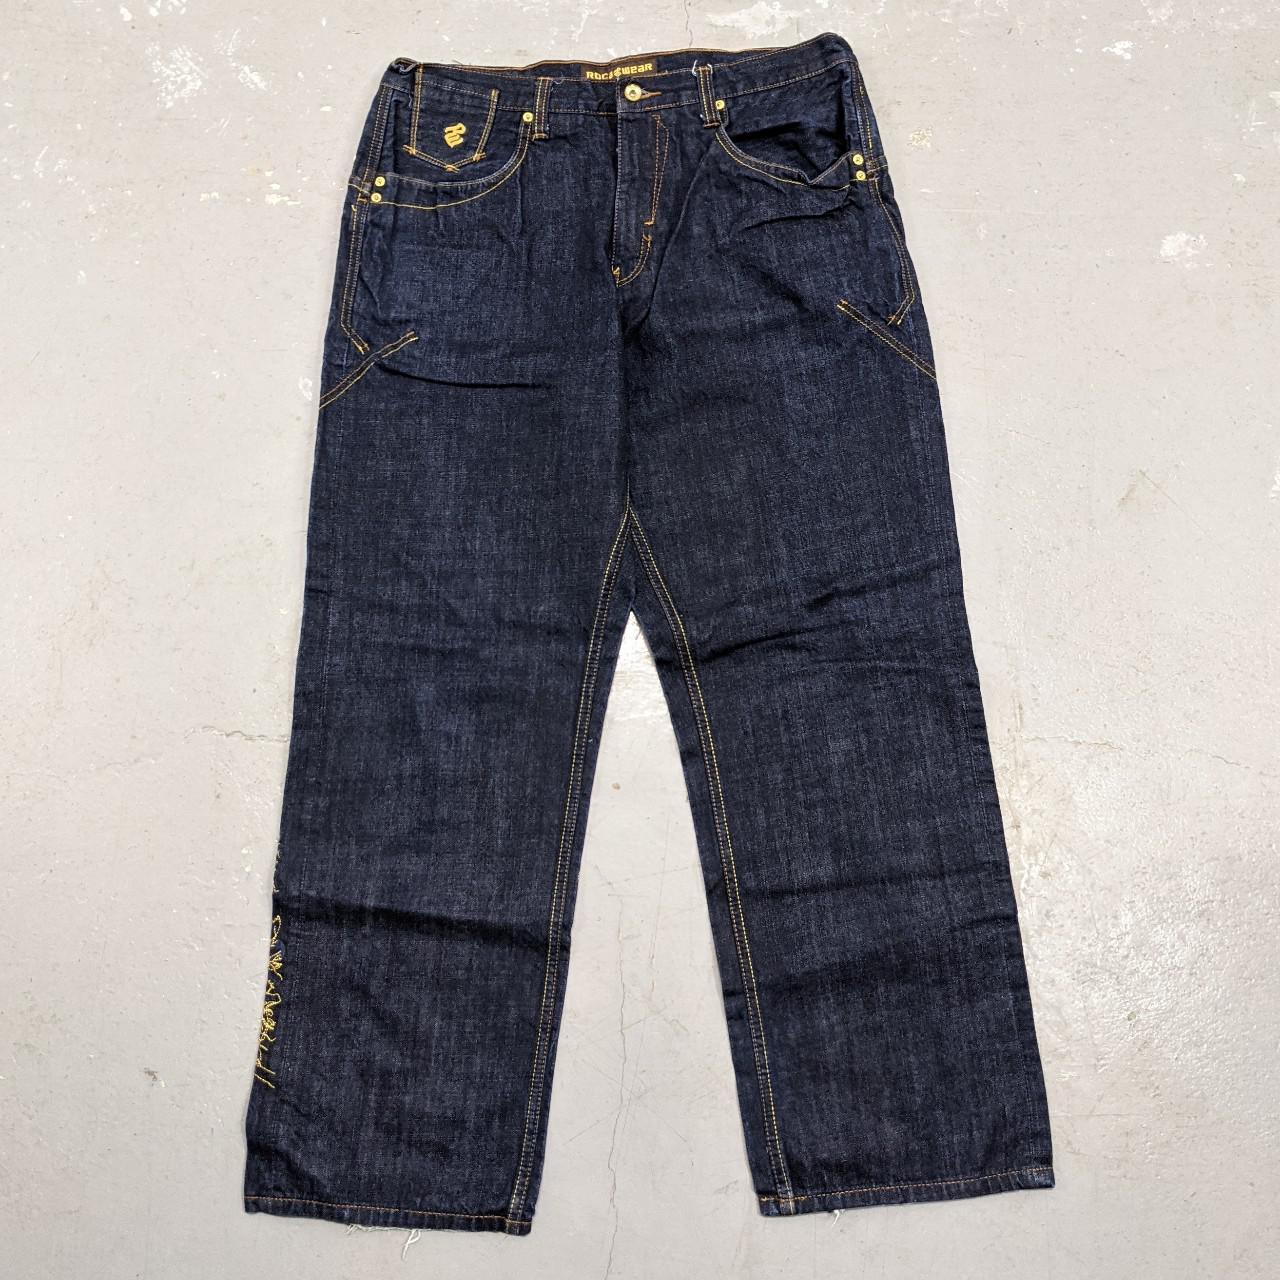 Rocawear Men's Navy and Gold Jeans (2)